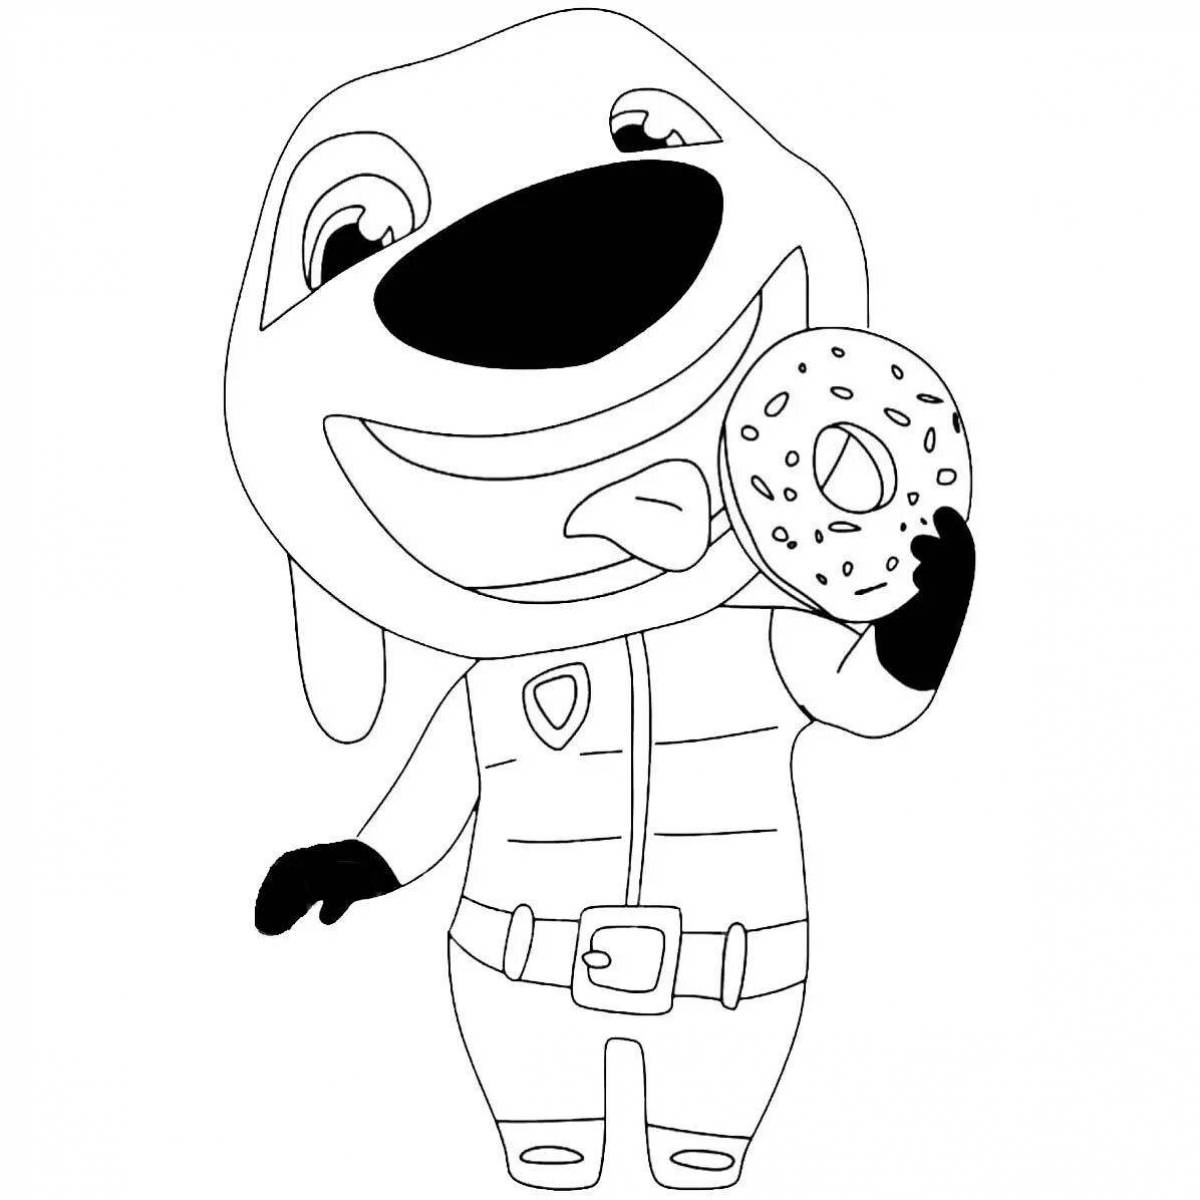 Animated run for gold coloring page